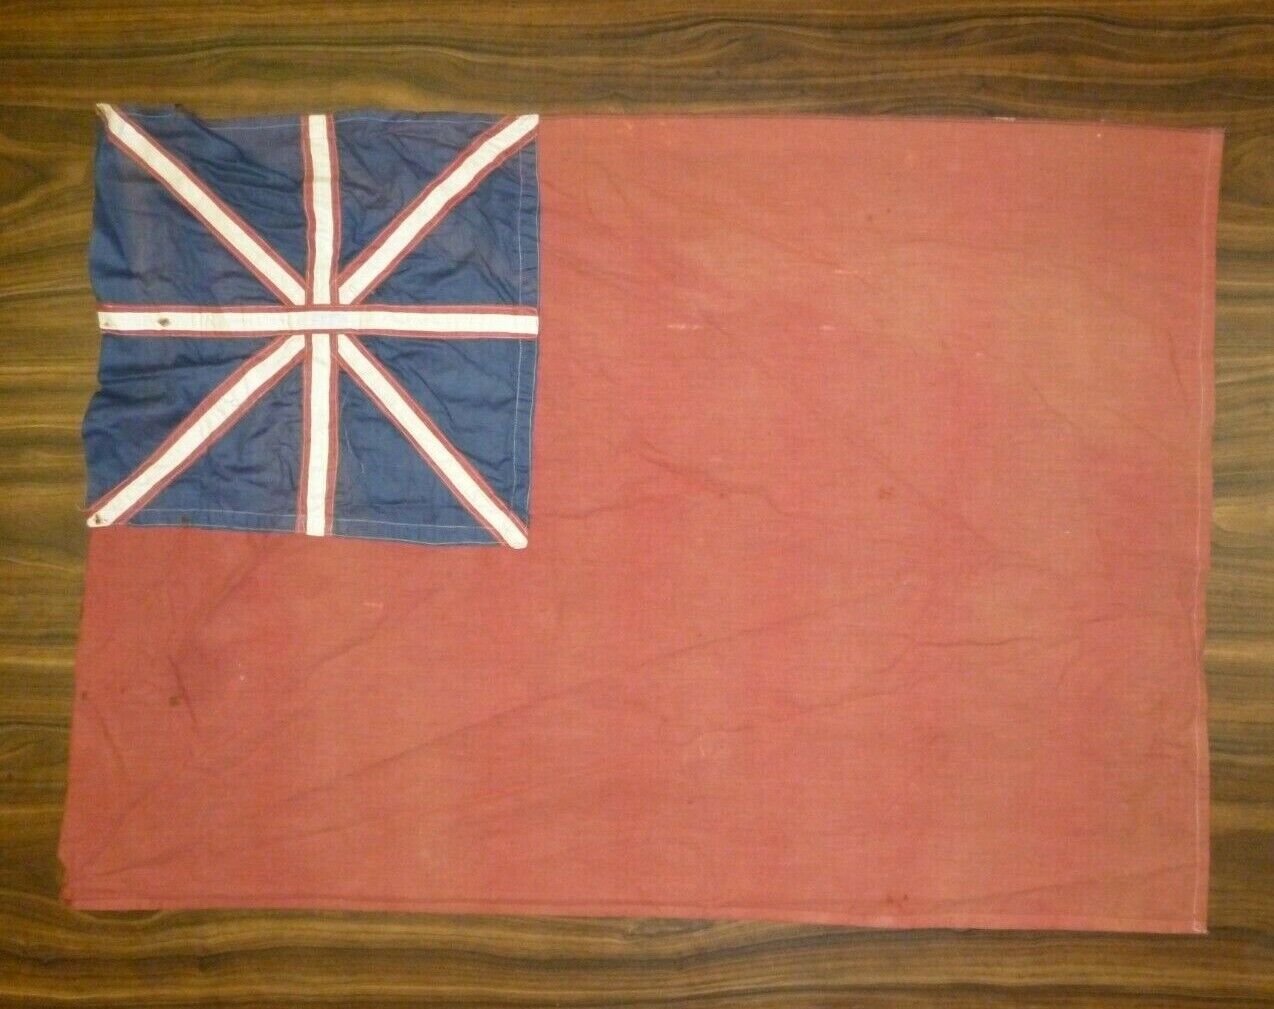 ANTIQUE ENGLISH ENSIGN AND RUSSIAN  WW2 FLAGS FROM PARIS 1944 LIBERATION